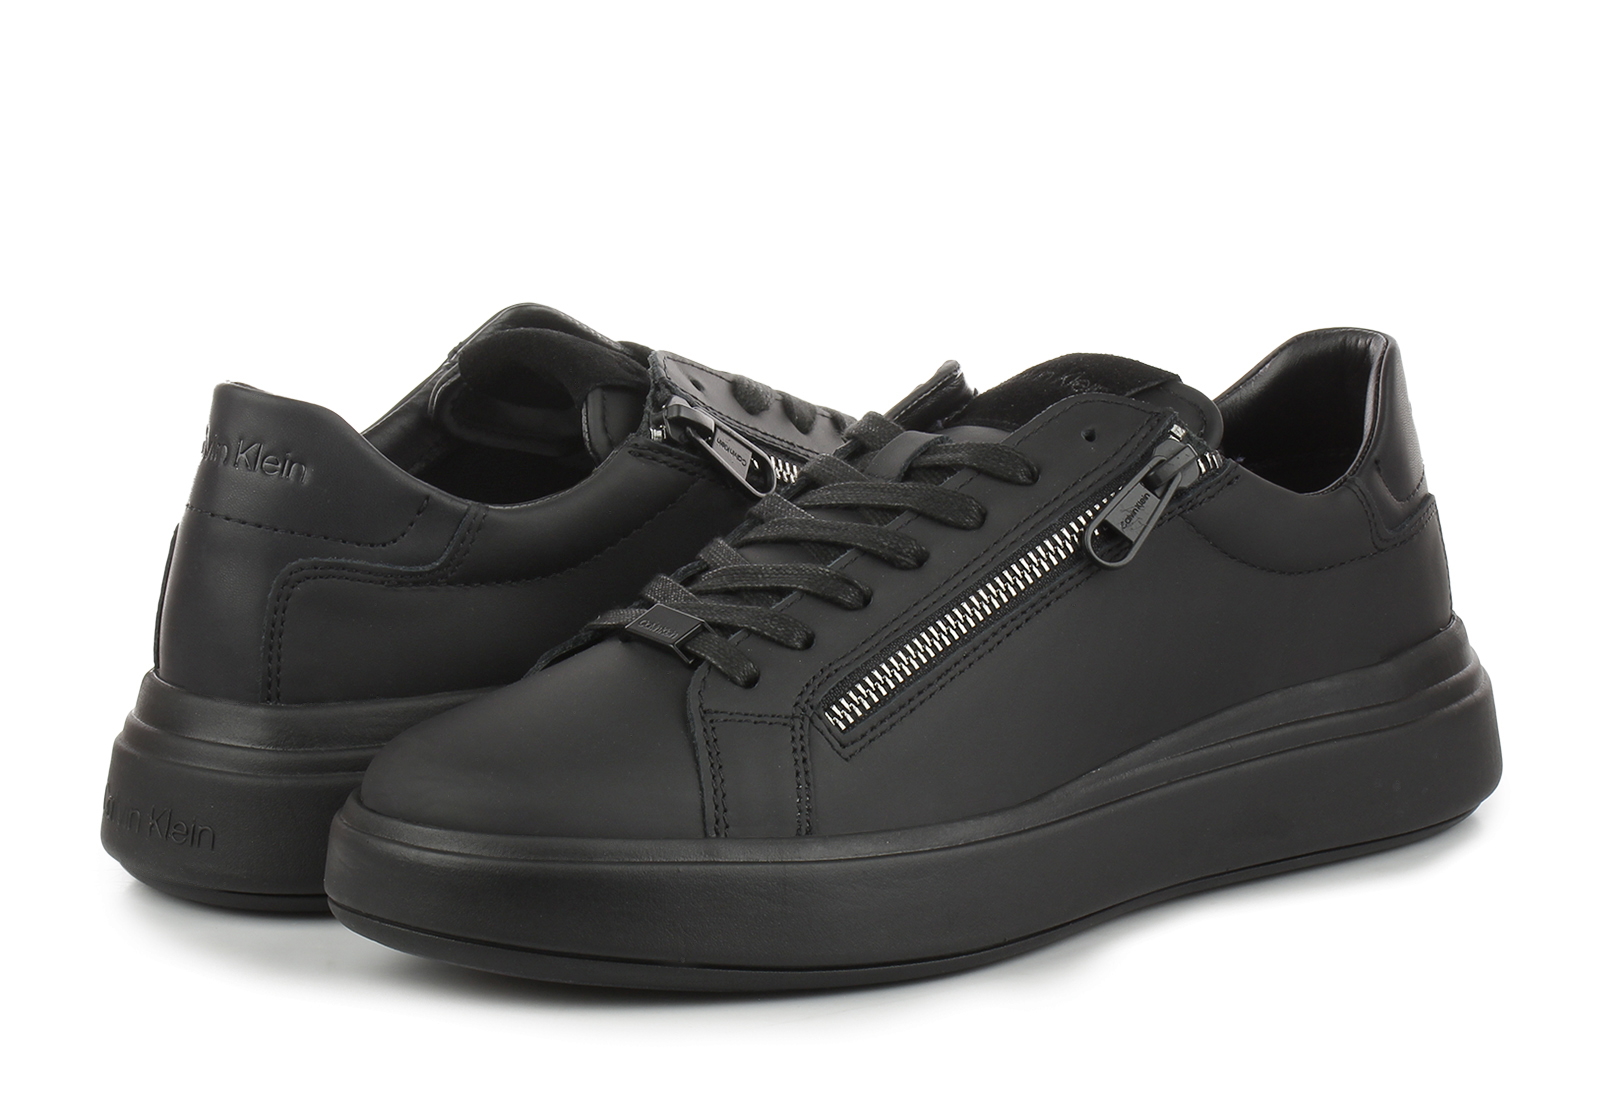 Calvin Klein Trainers - Camden 5l1 - HM00746-0GL - Online shop for sneakers,  shoes and boots